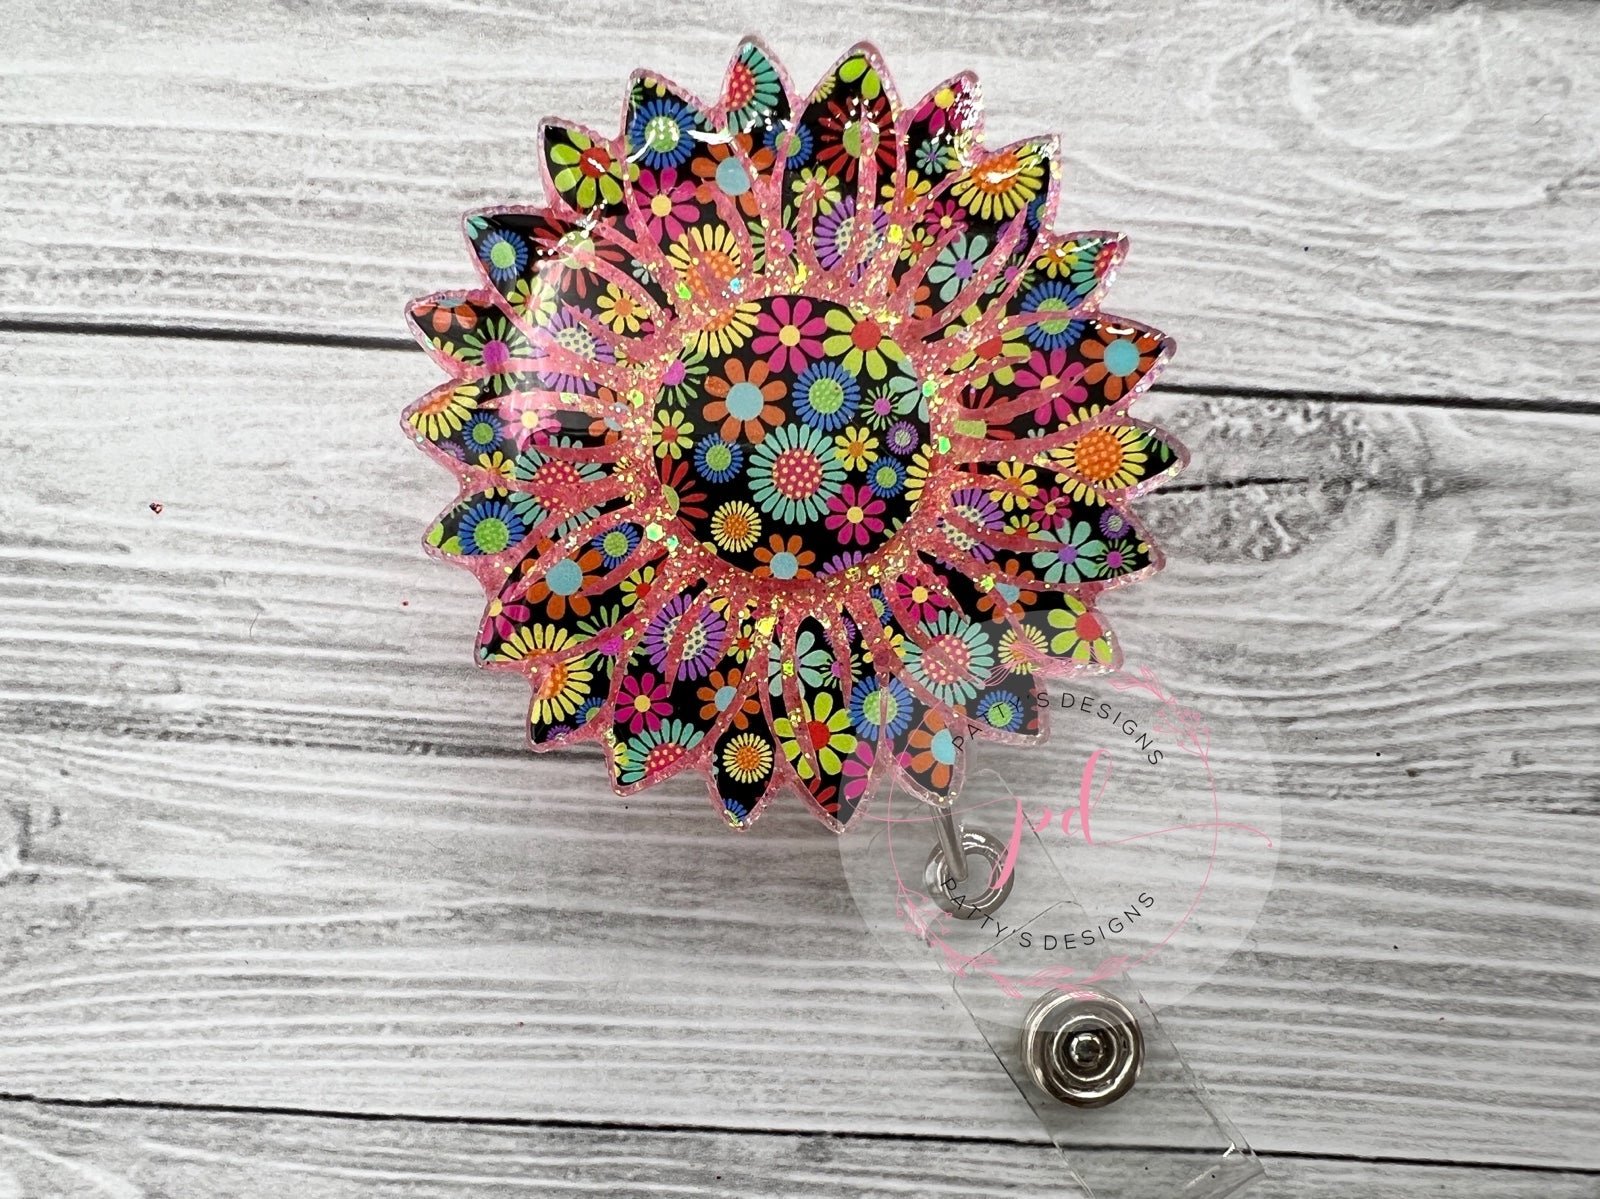 Flower Power Sunflower Badge Reel (Price is Firm, No Offers) 6my9uFpuu